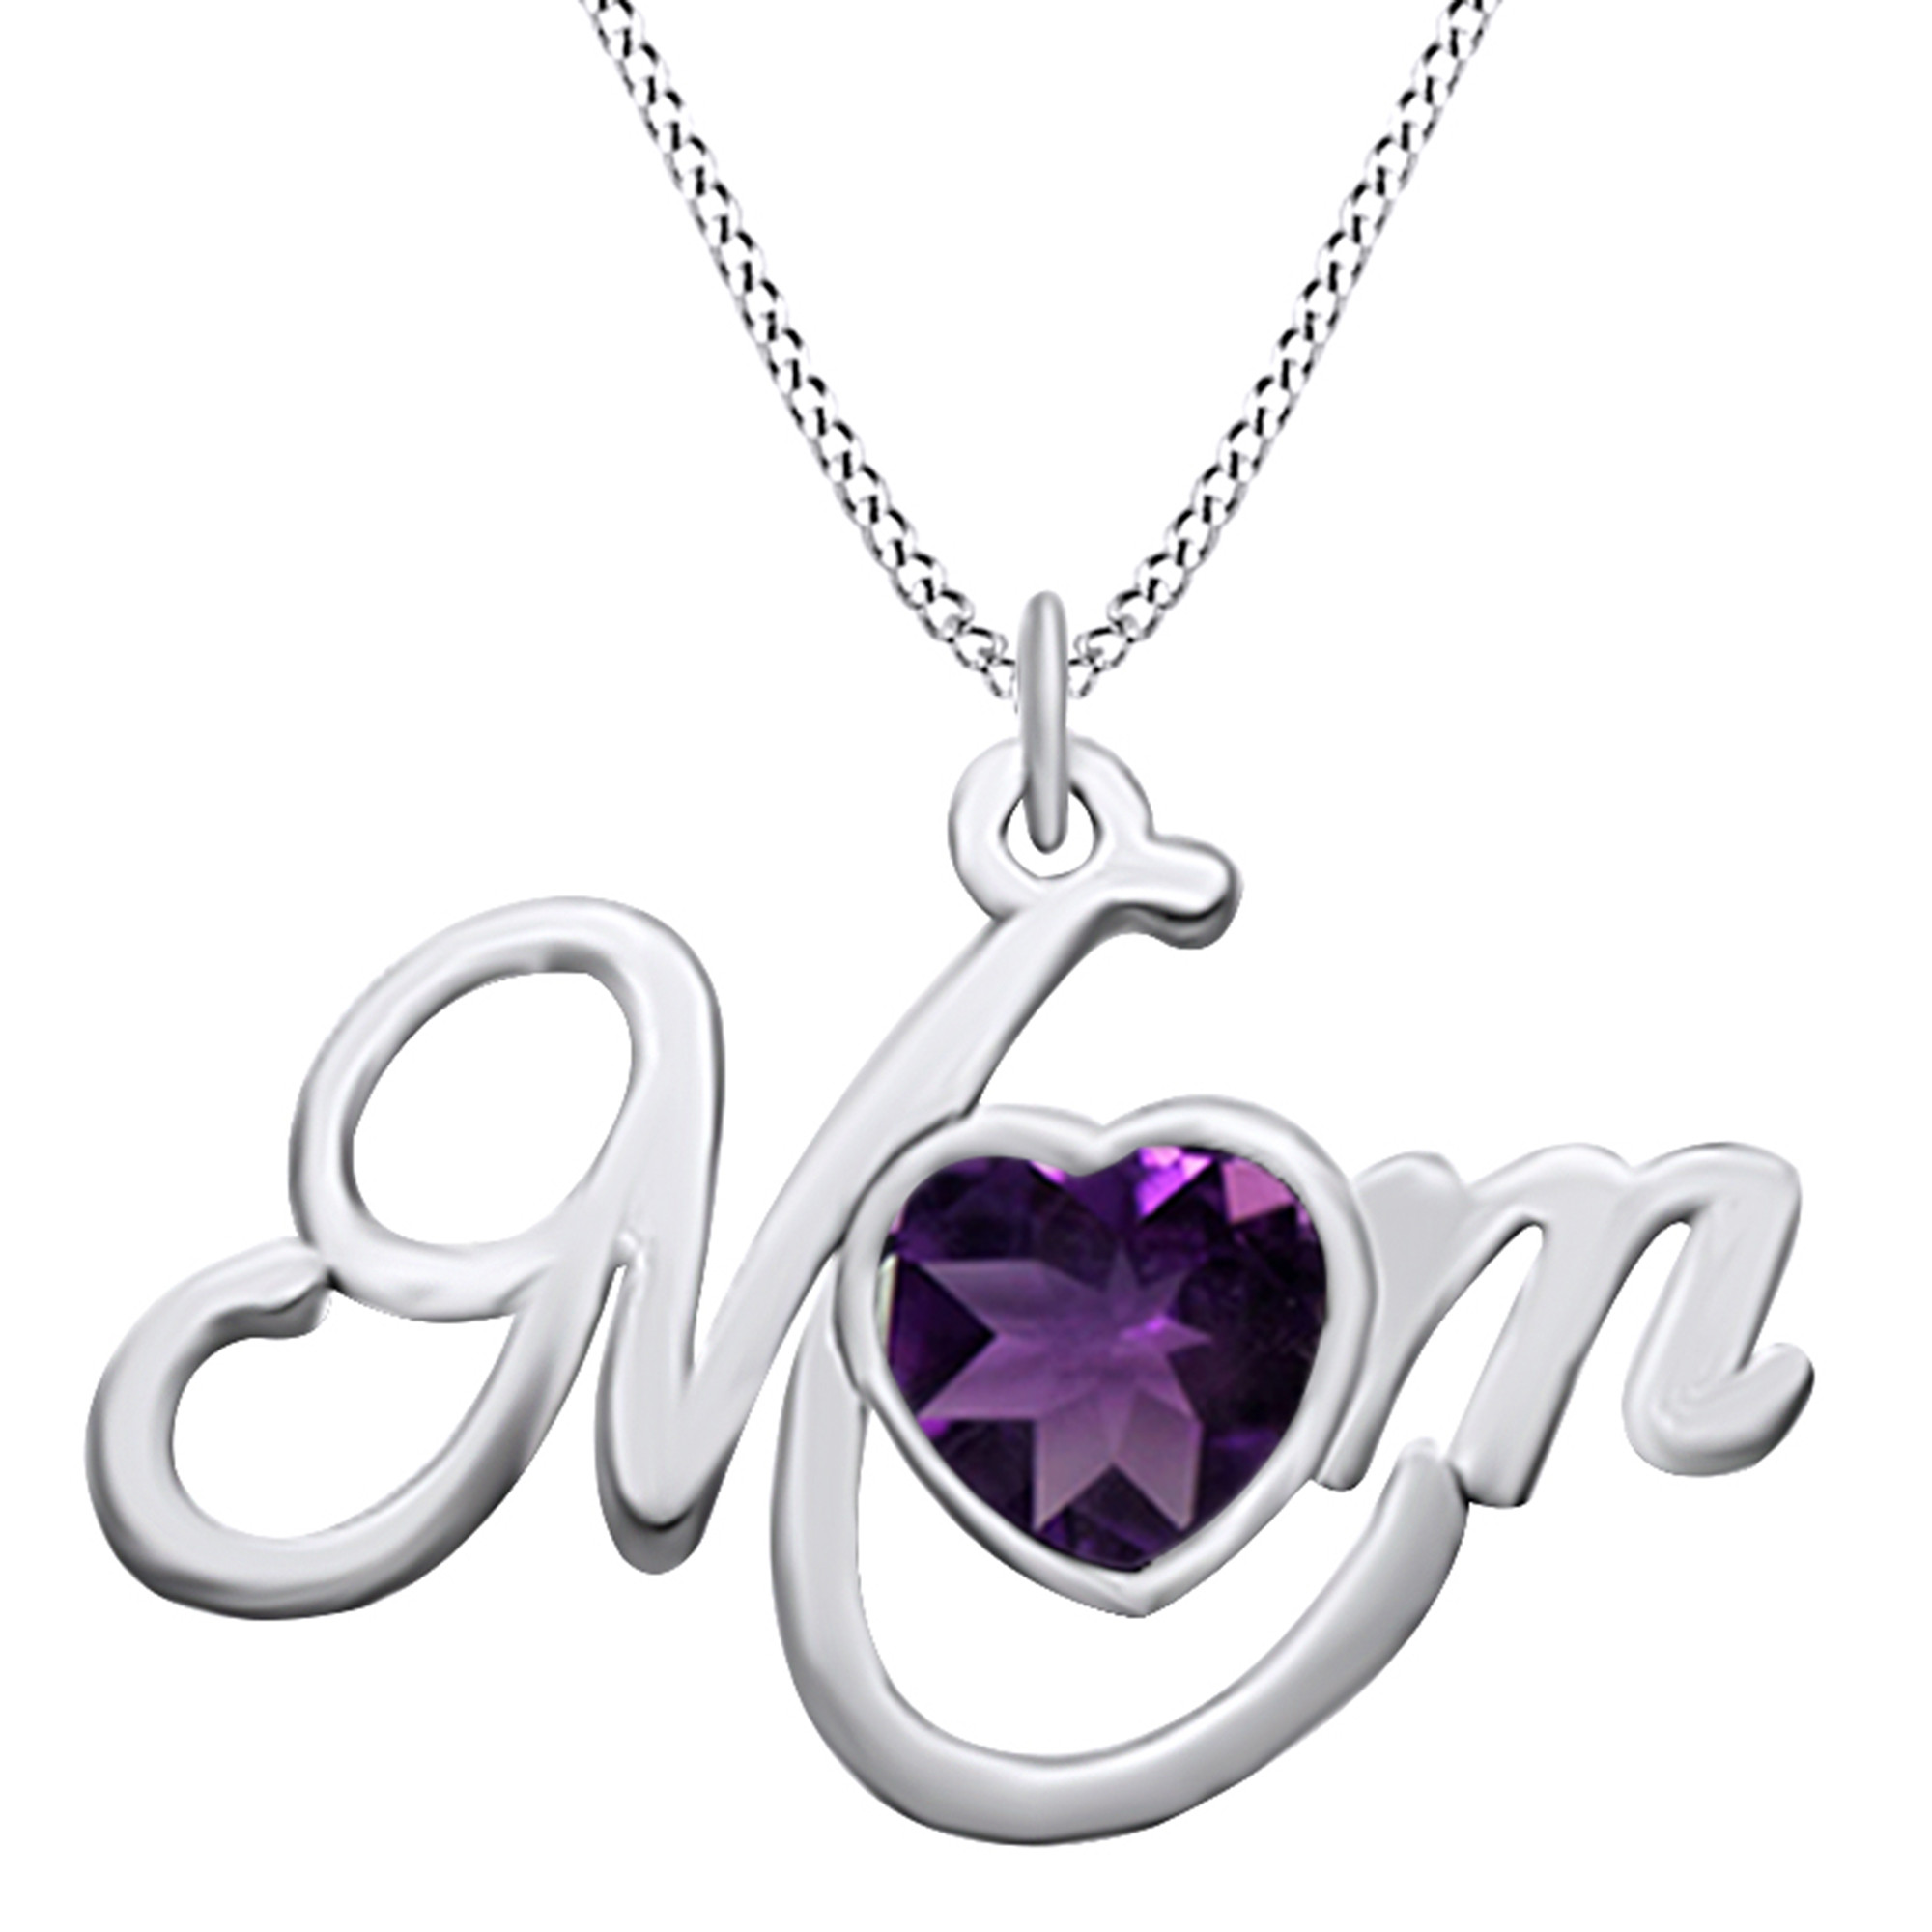 Mom Necklace White Gold
 Mother s Day Jewelry Gifts Heart Cut Simulated Amethyst